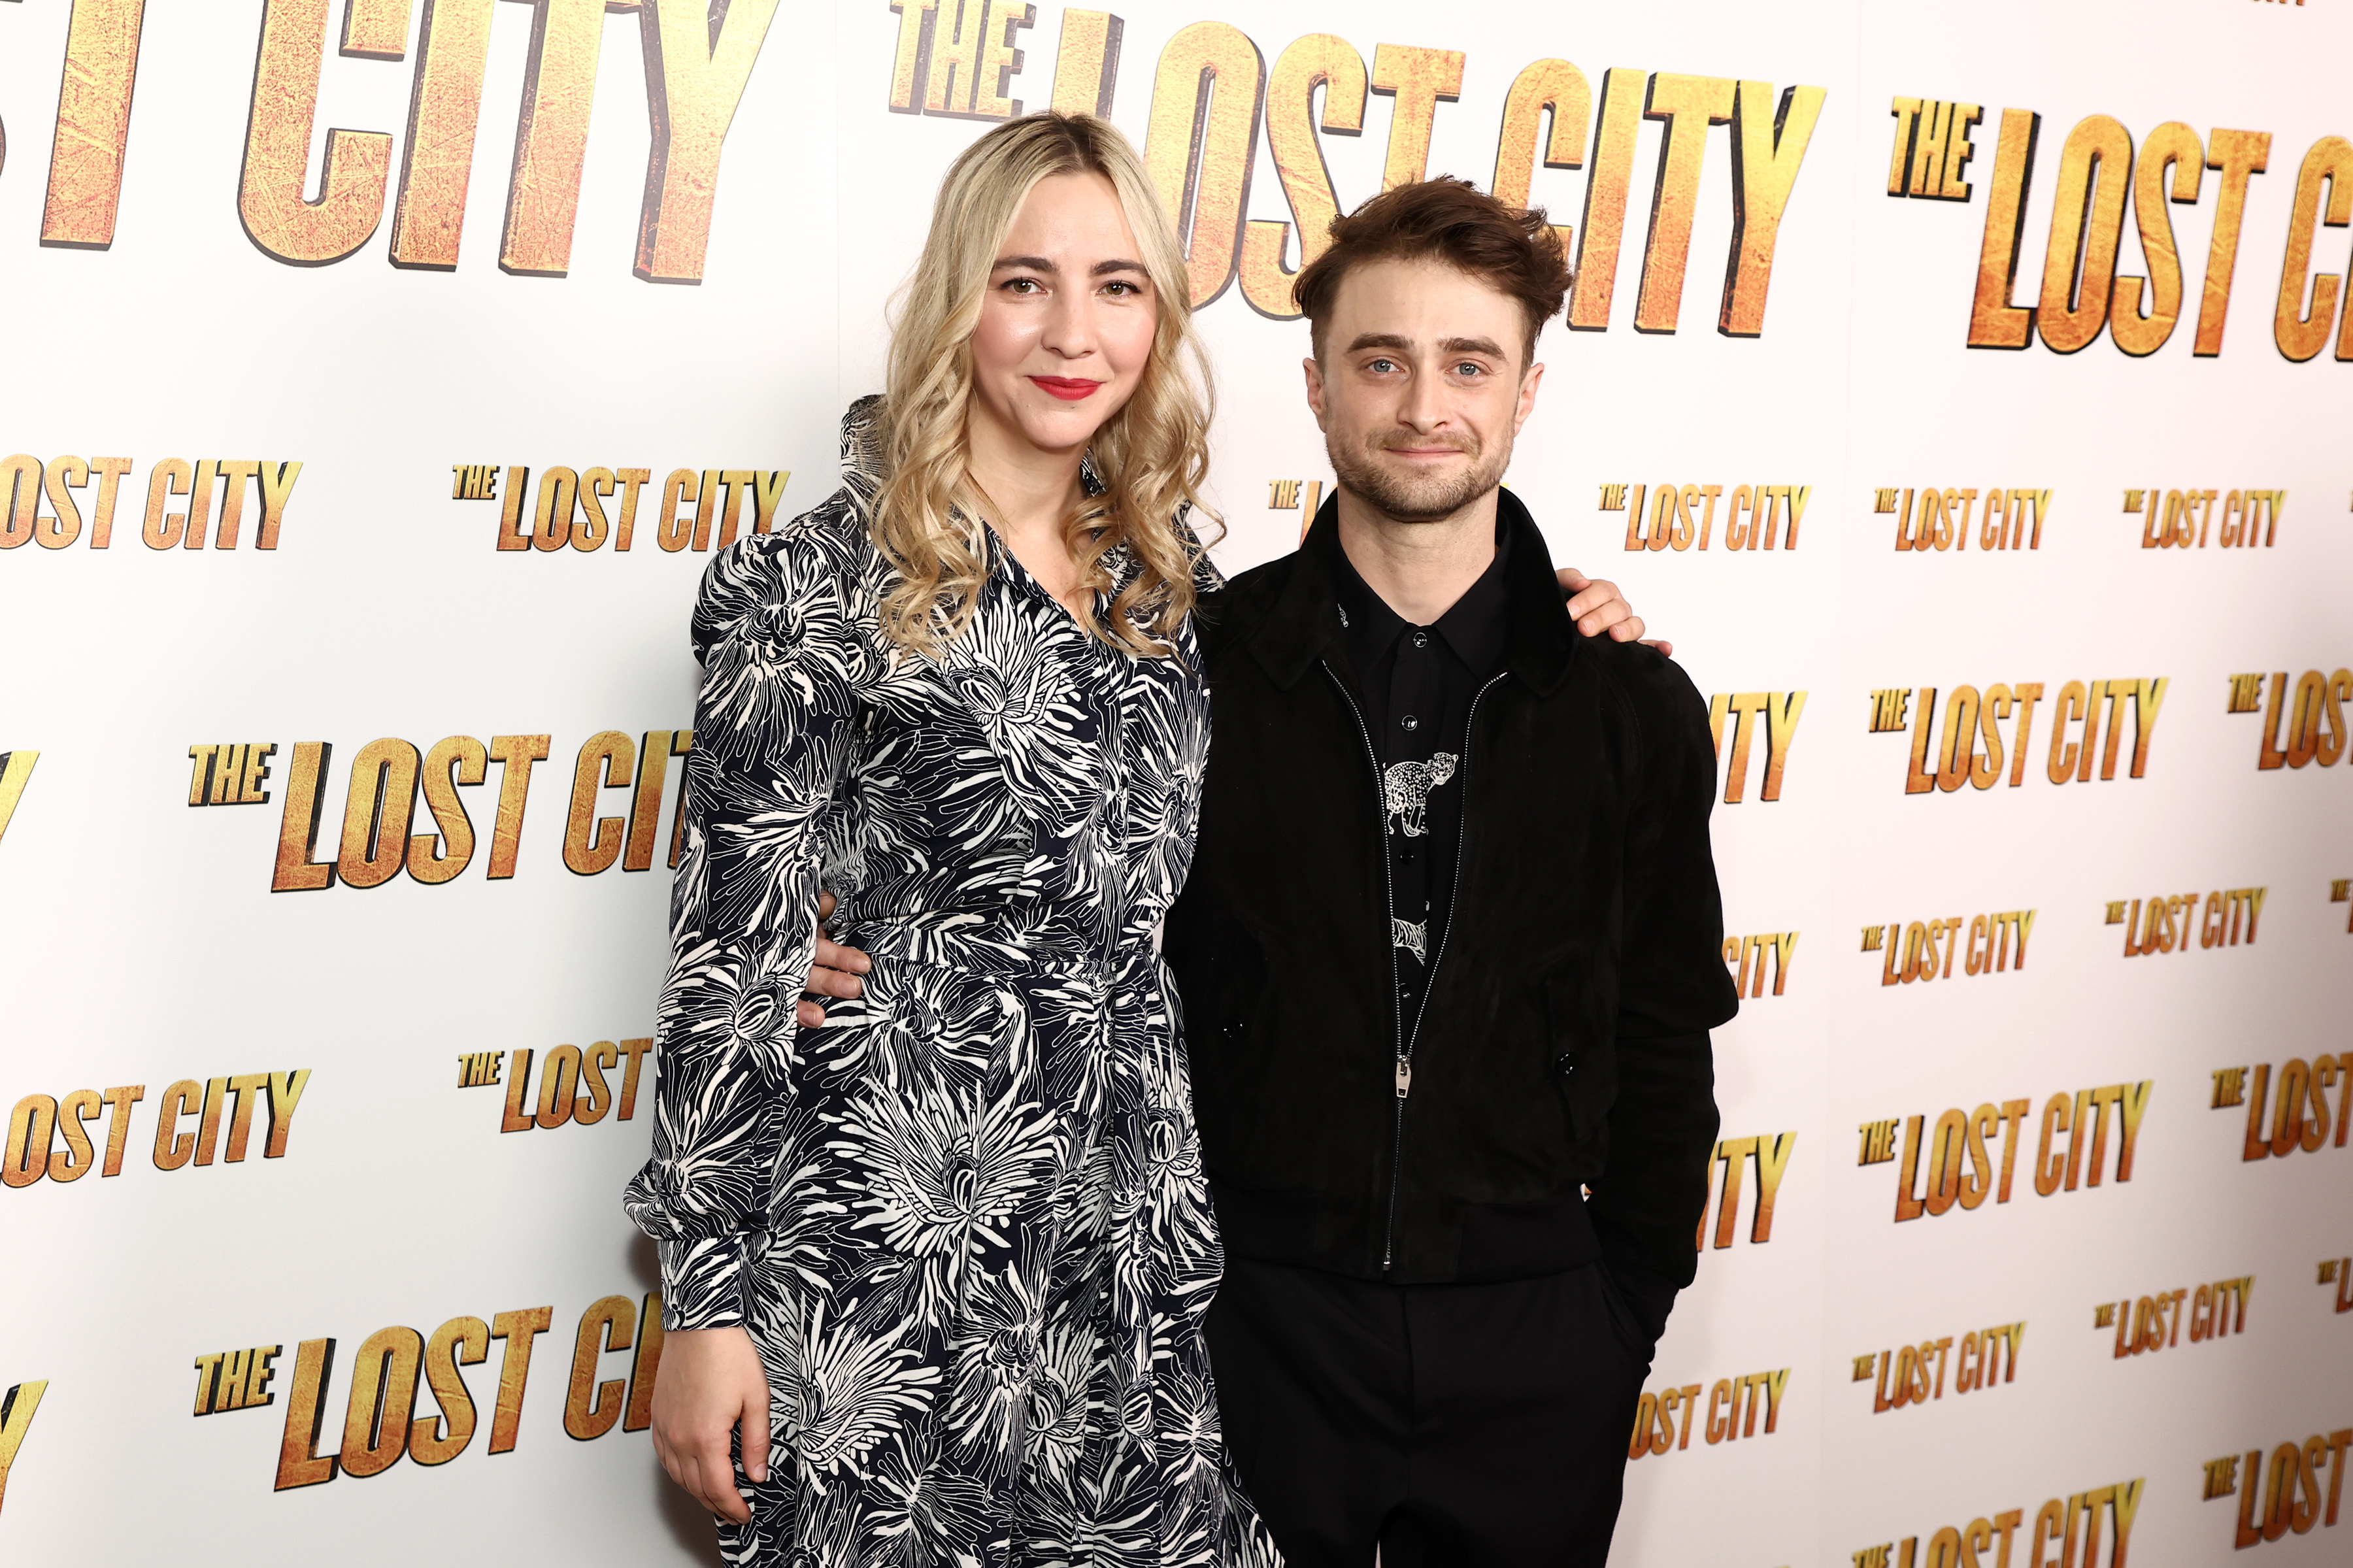 Daniel Radcliffe and Erin Darke attend a screening of The Lost City on March 14 in New York City.